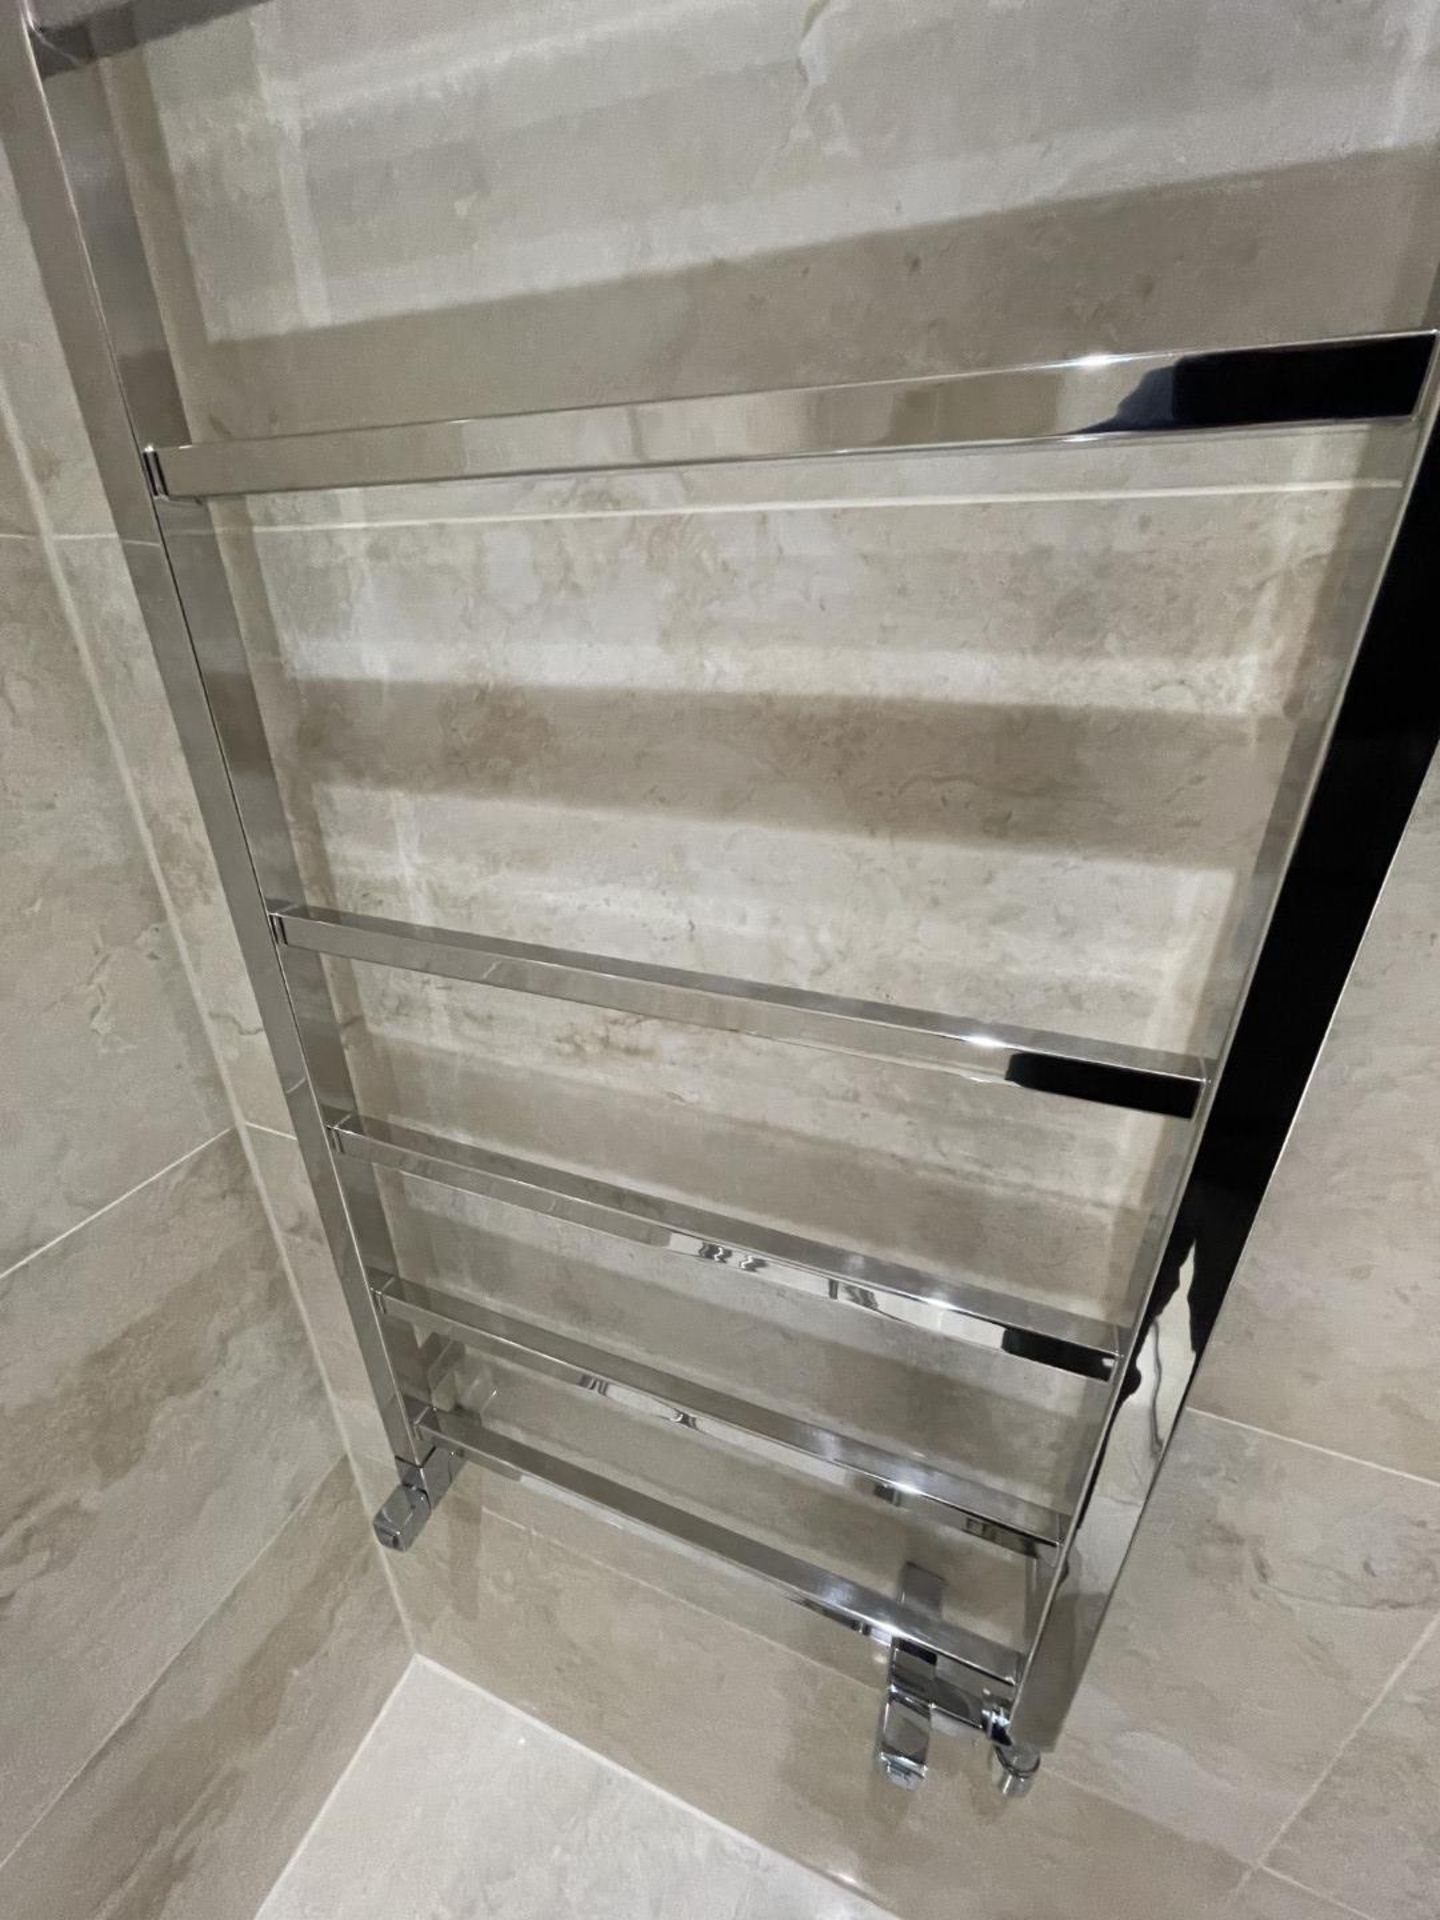 1 x Premium Towel Radiator in Chrome - Ref: PAN233 - CL896 - NO VAT ON THE HAMMER - Location: - Image 10 of 10